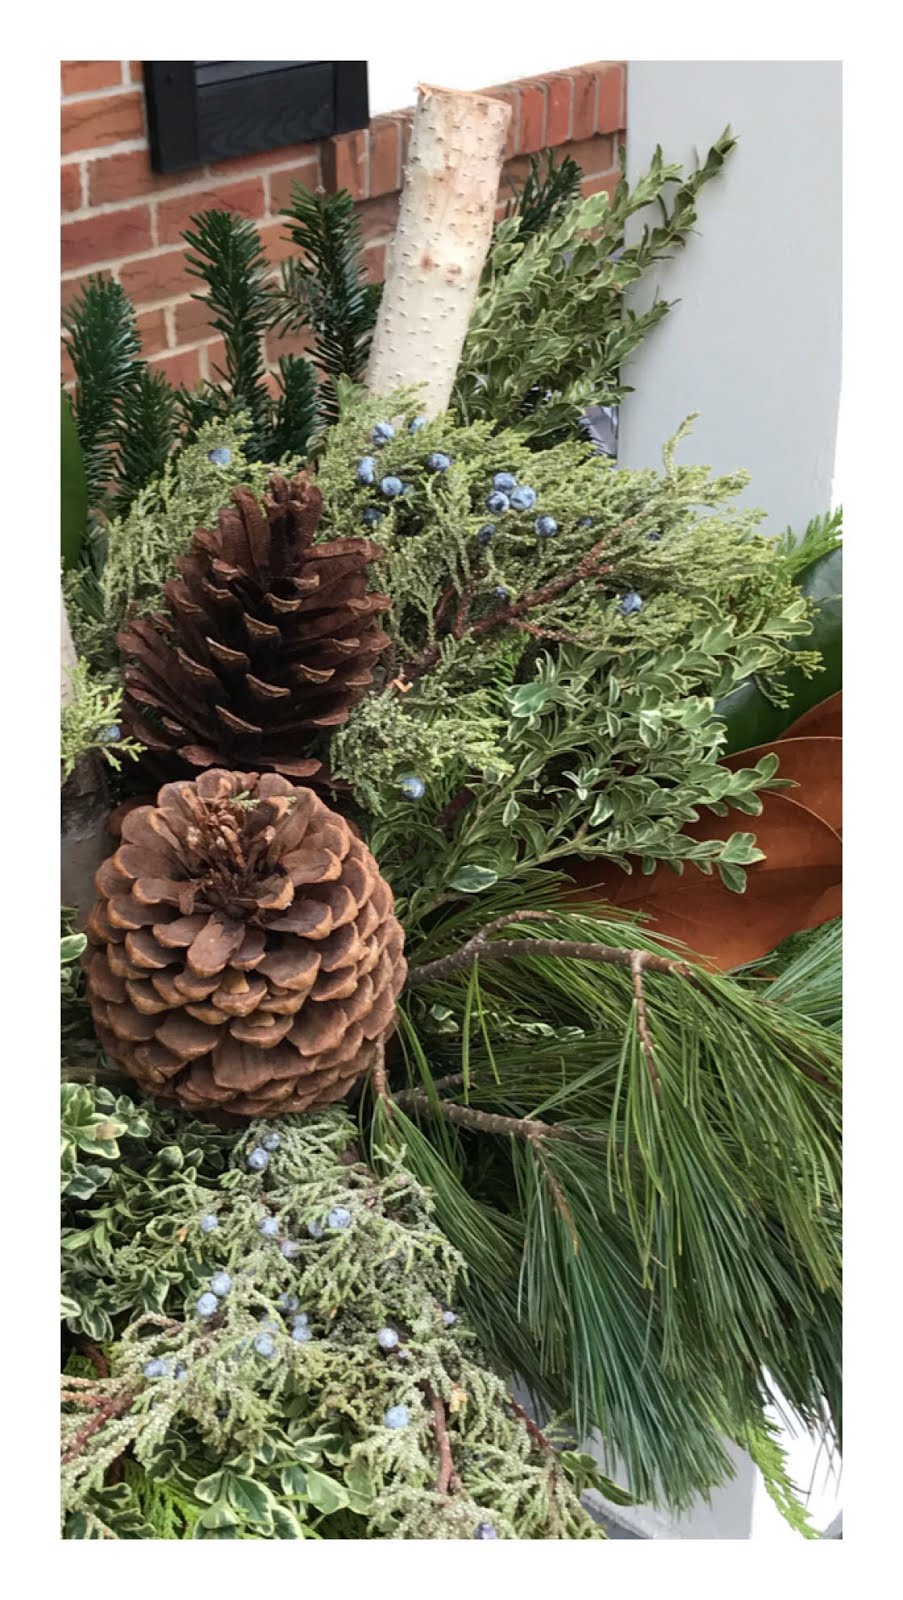 Make a Simple Pine Bough Arrangement - Organize and Decorate Everything